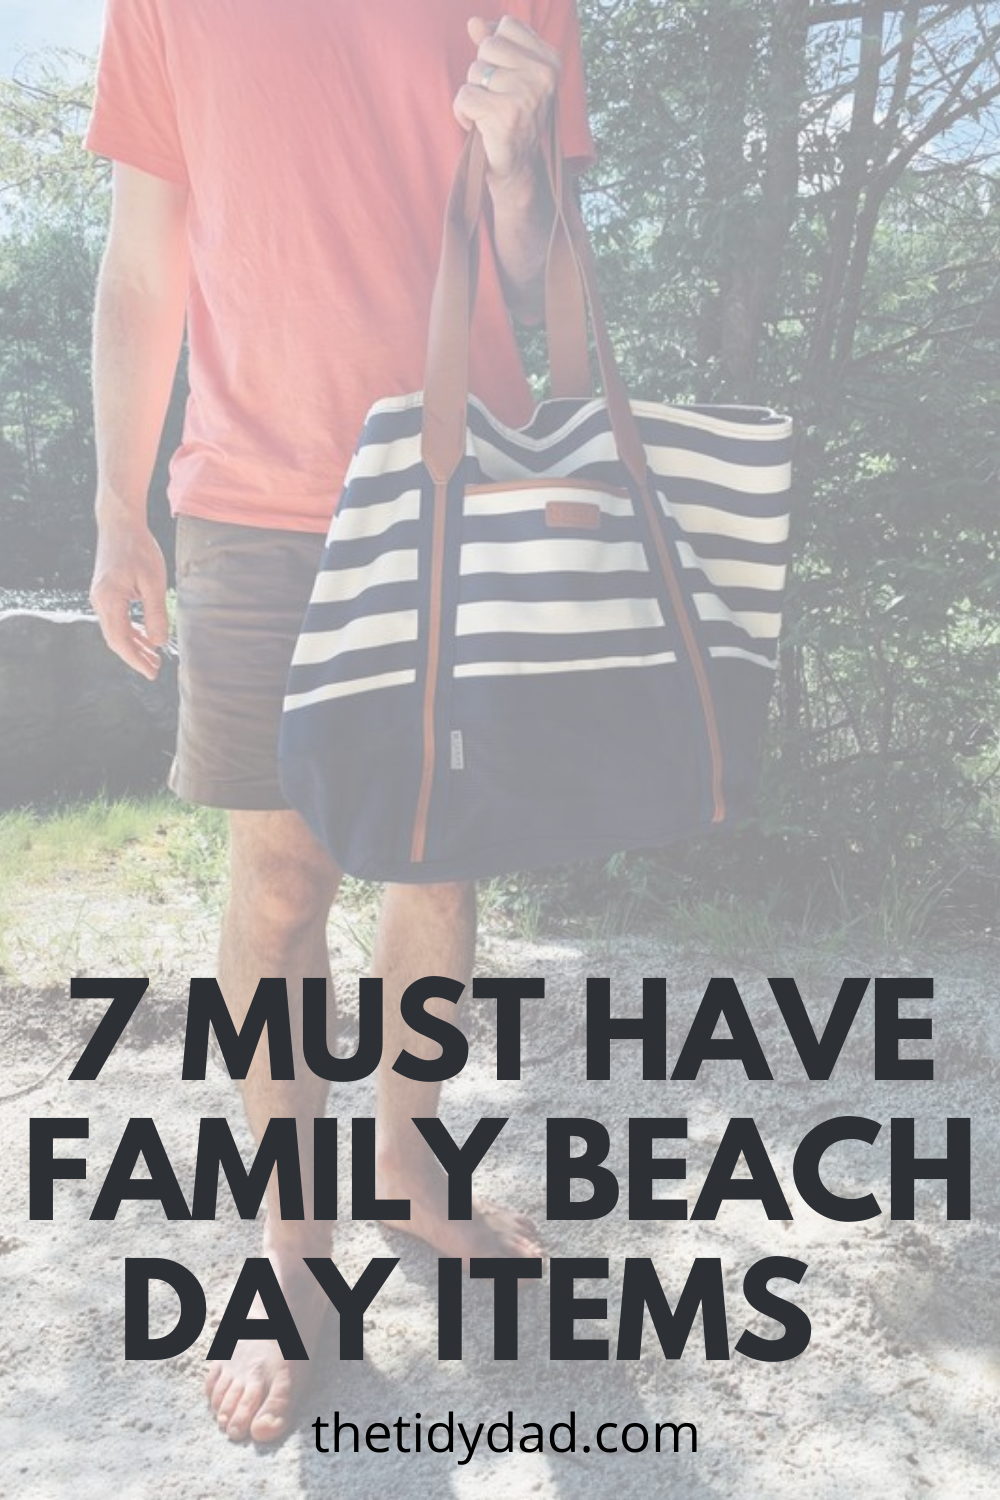 Family Beach Day Items: Best Products for the Outdoors – thetidydad.com